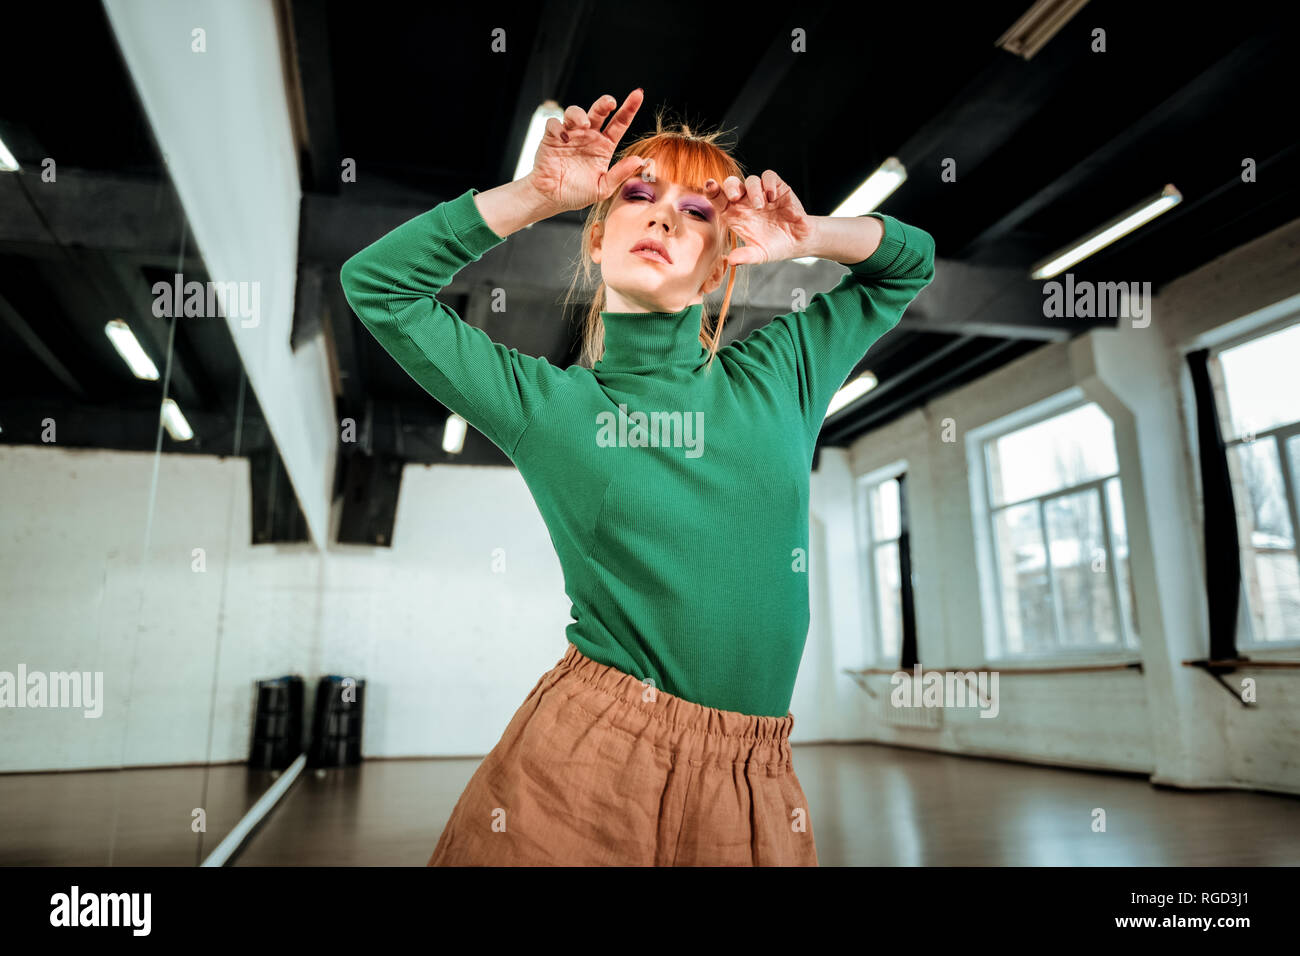 Young red-haired professional choreographer with bright makeup posing Stock Photo